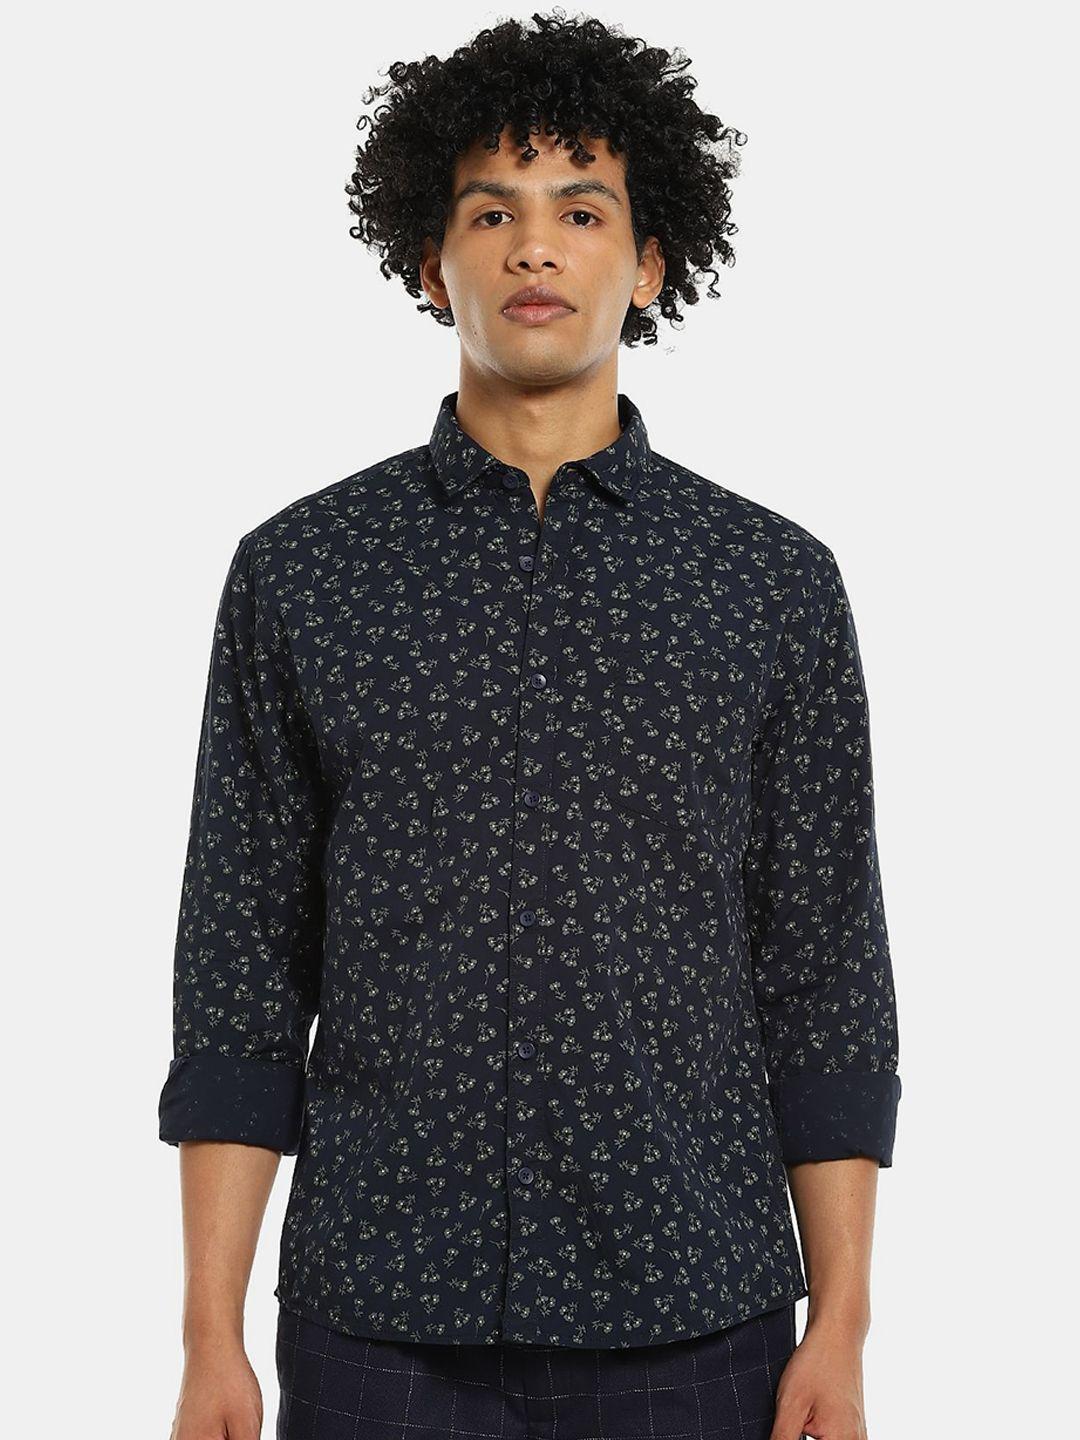 ruggers men navy blue & white floral opaque printed cotton casual shirt